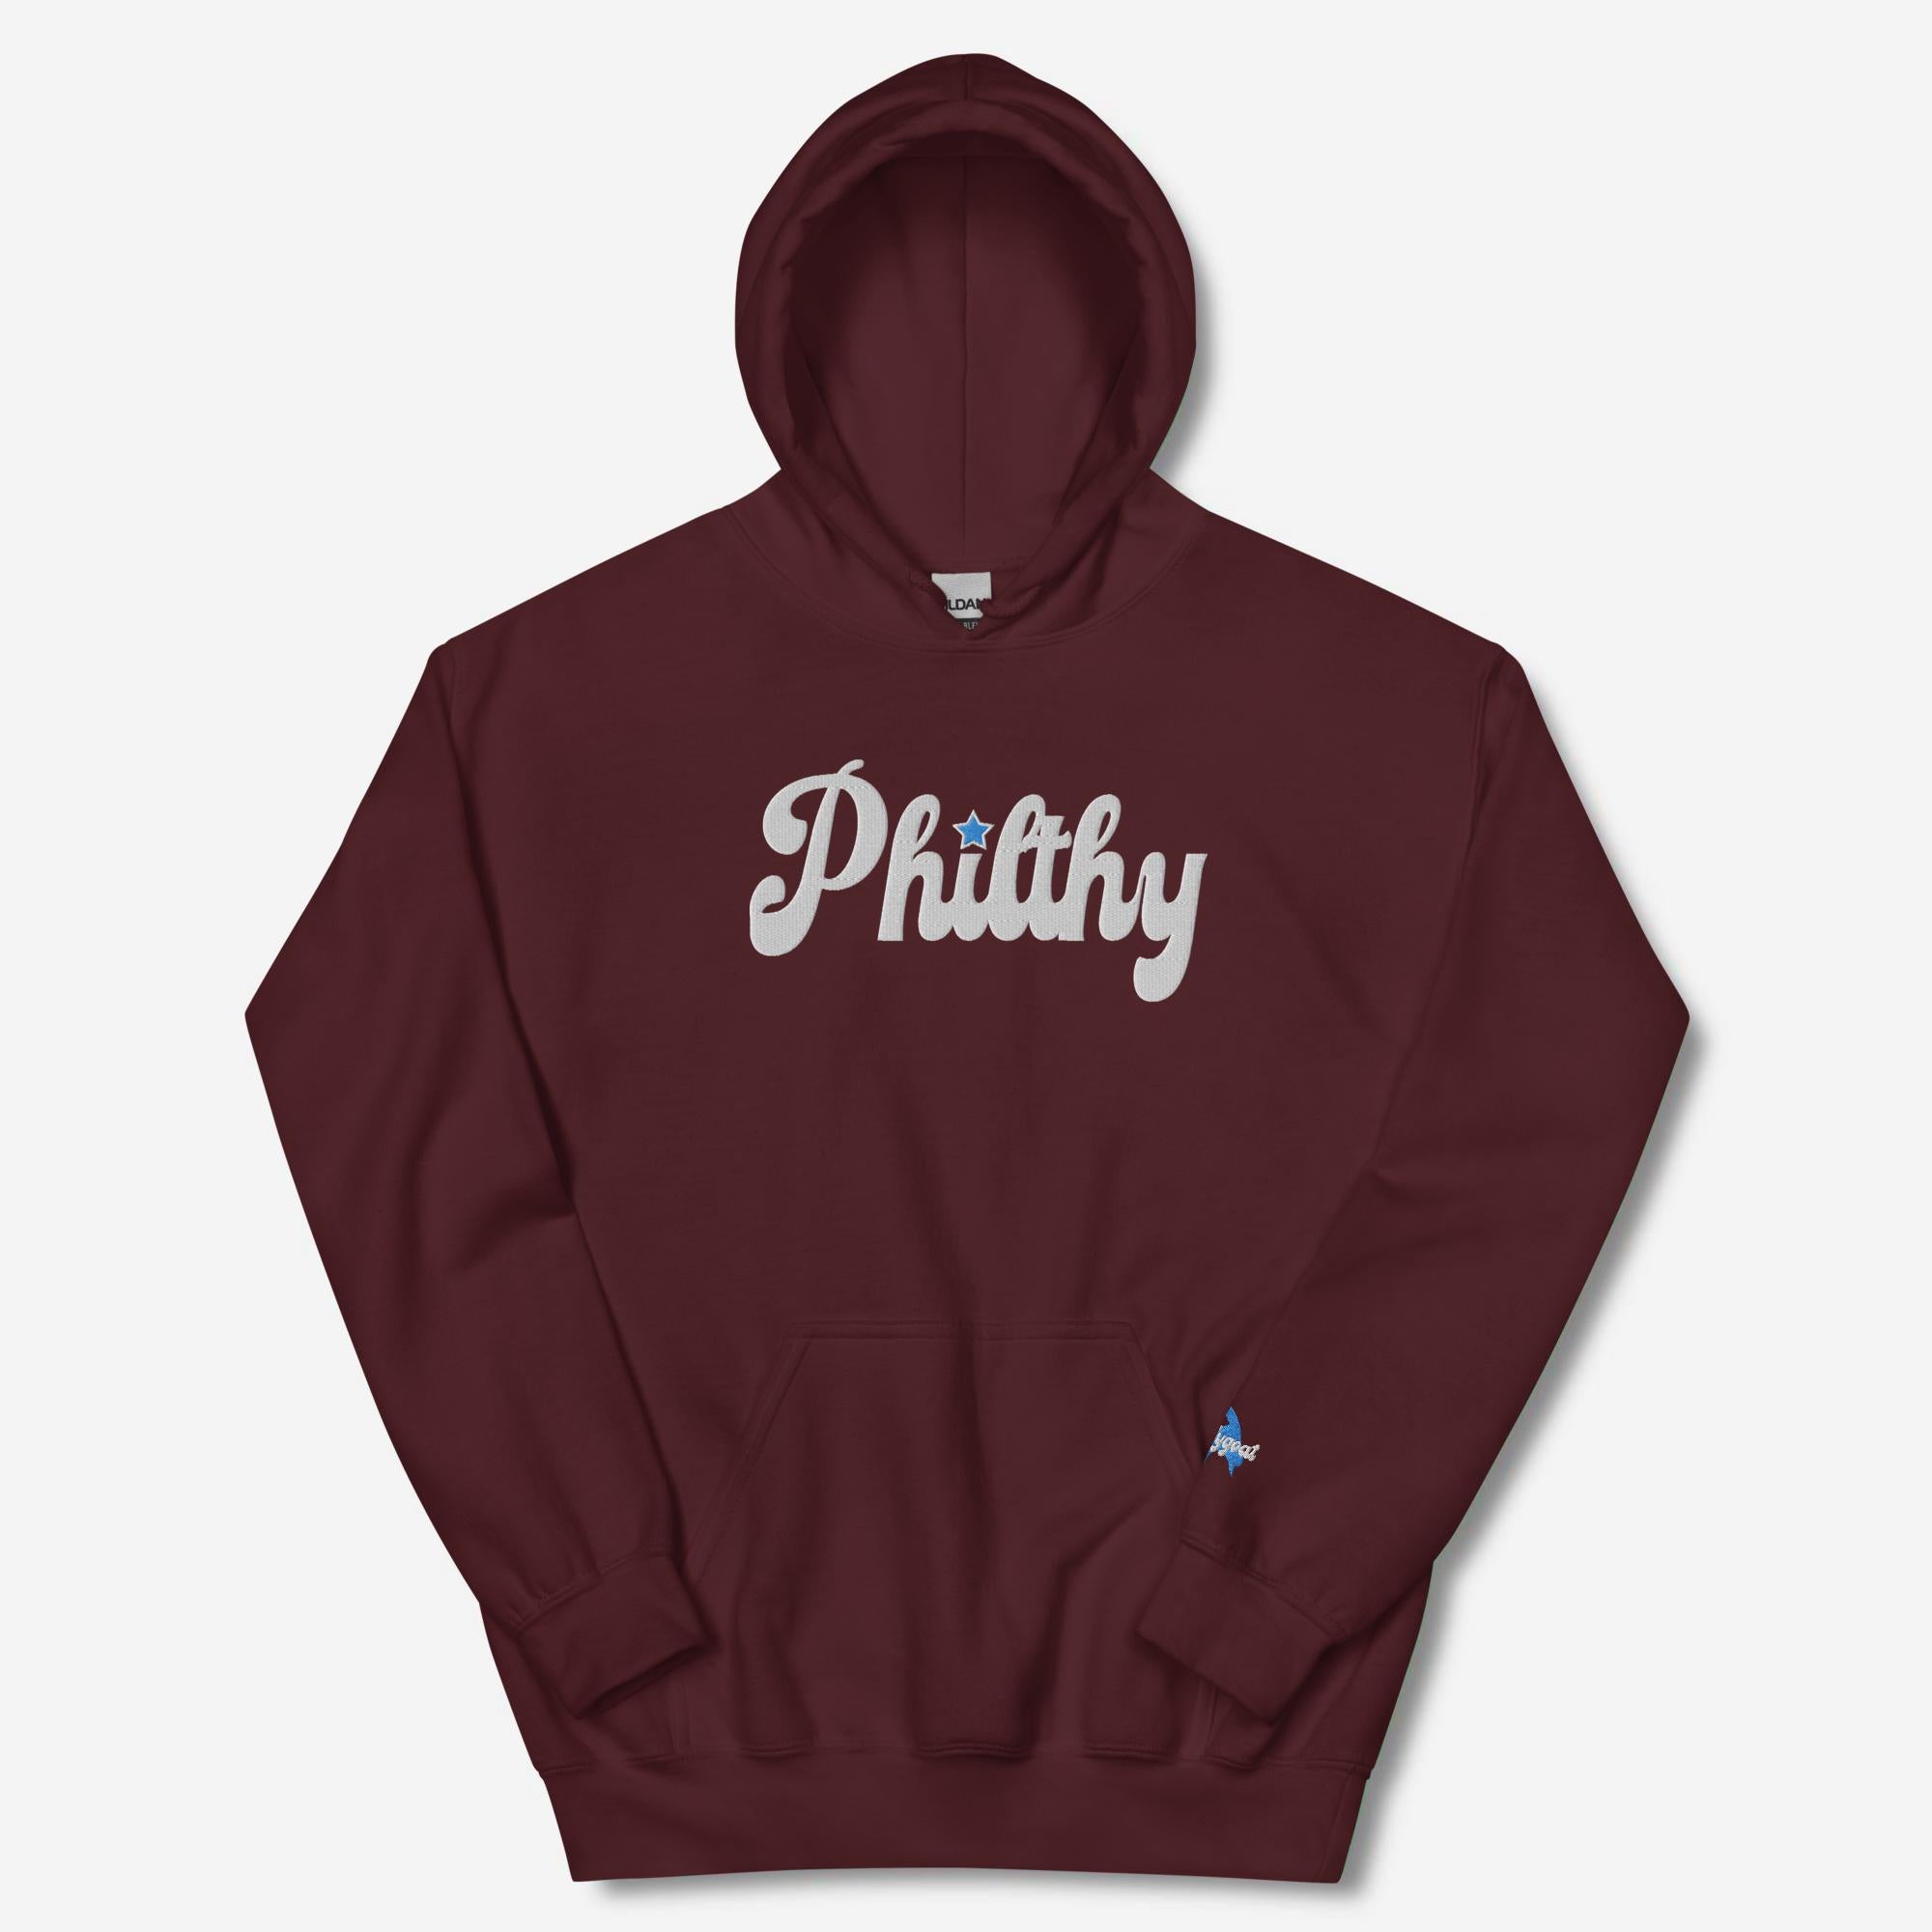 "Philthy" Embroidered Hoodie